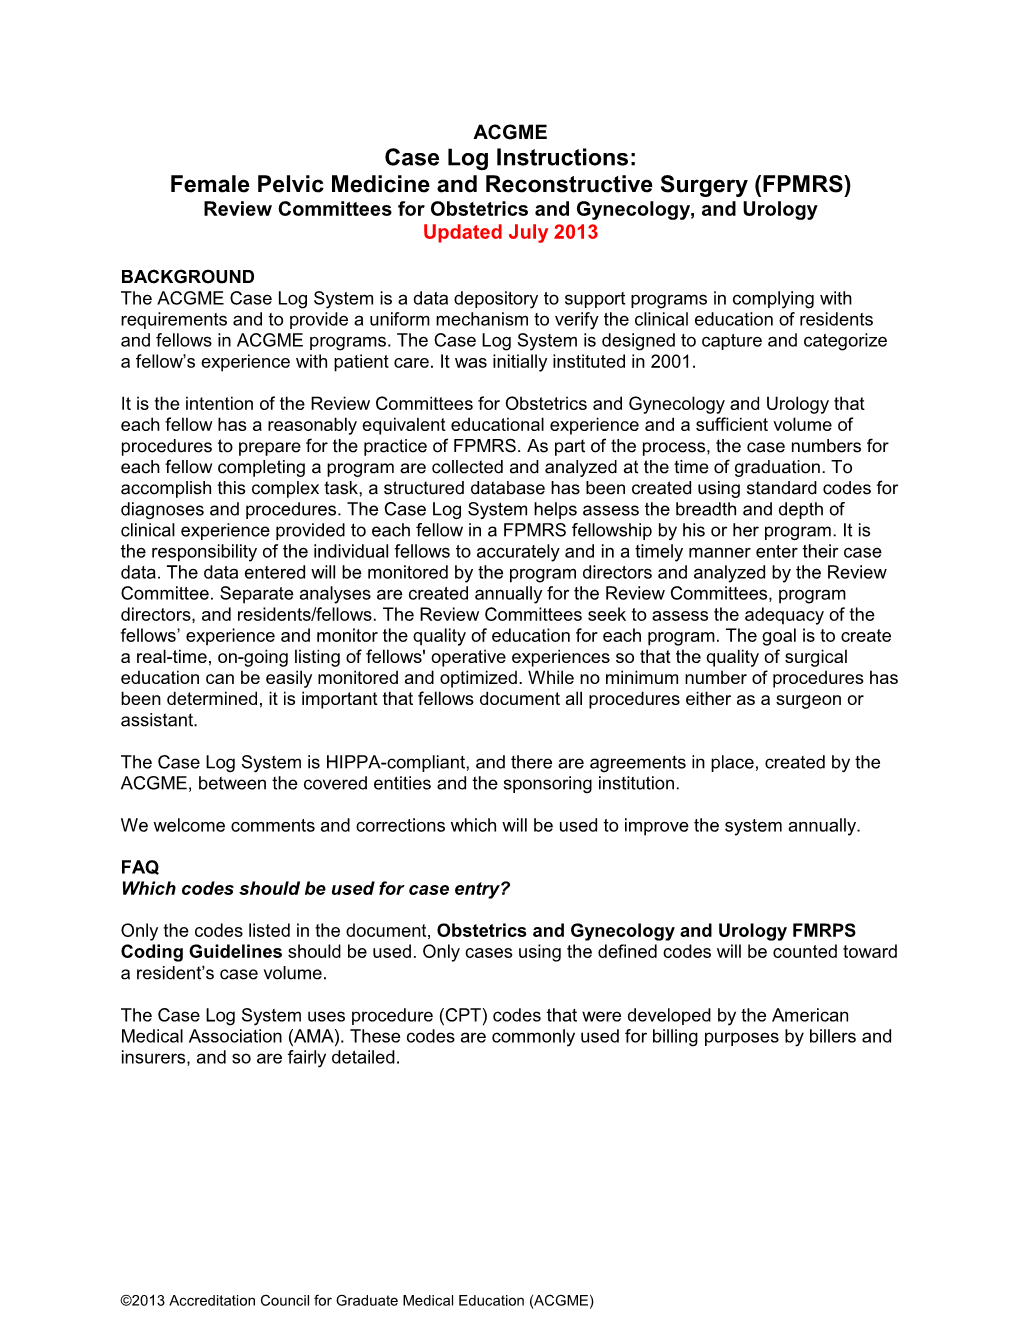 Case Log Instructions: Female Pelvic Medicine and Reconstructive Surgery (FPMRS) Review Committees for Obstetrics and Gynecology, and Urology Updated July 2013